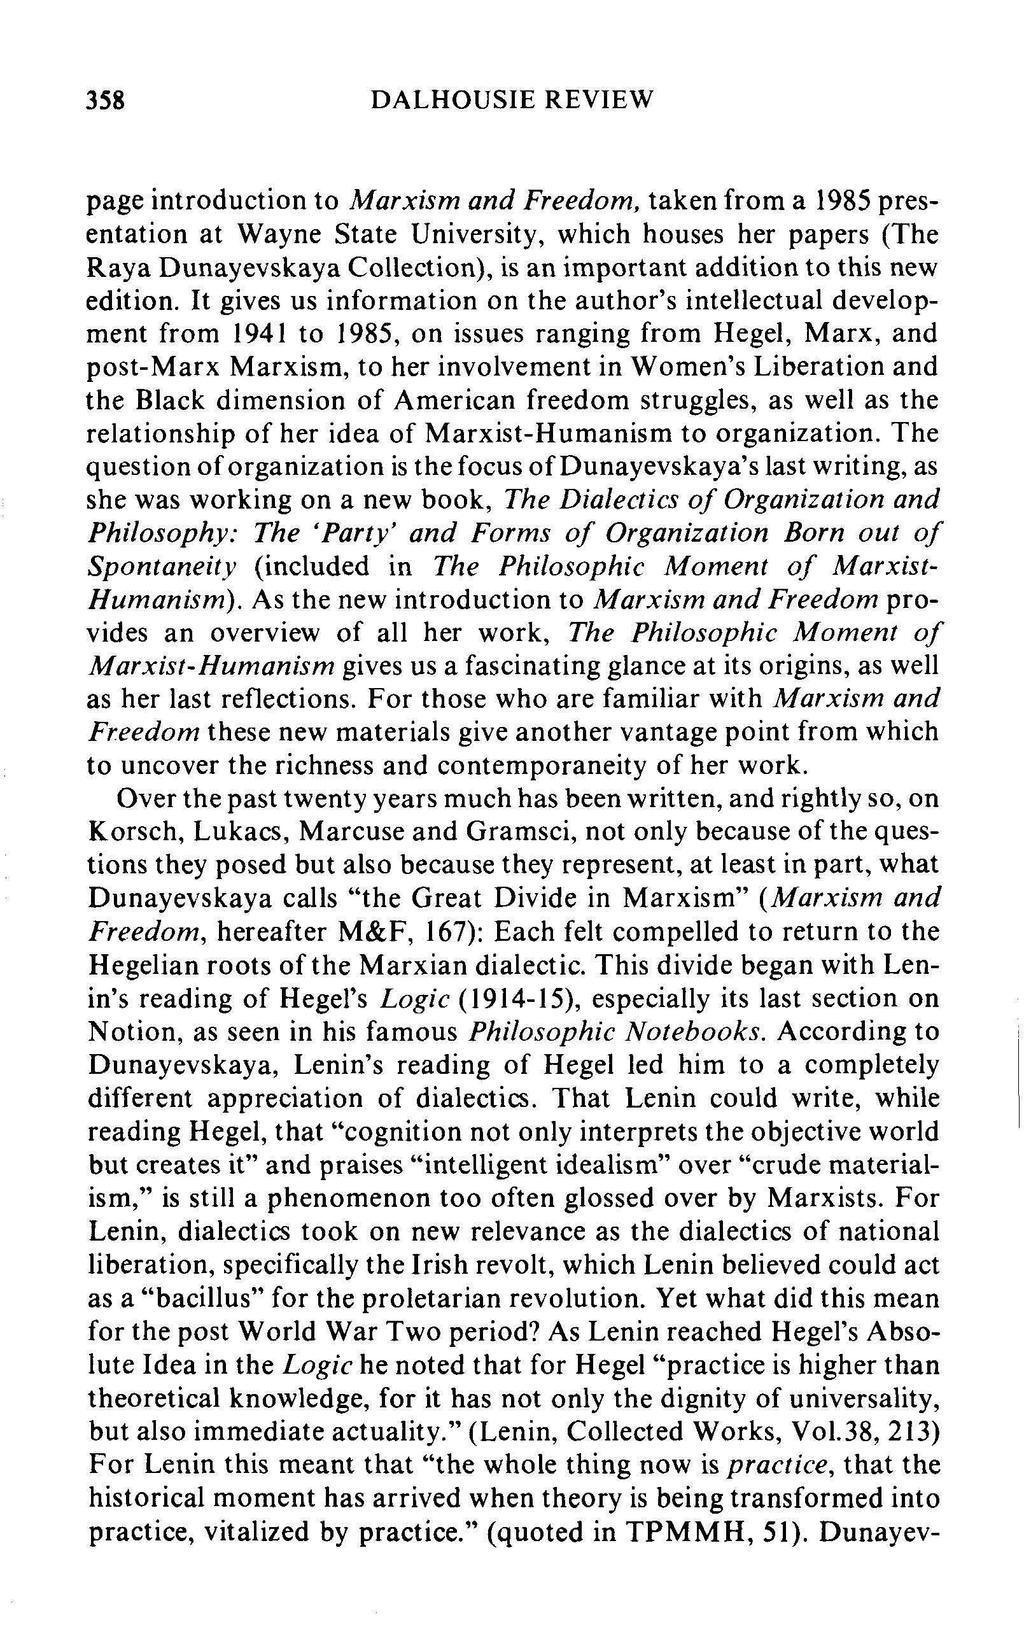 358 DALHOUSIE REVIEW page introduction to Marxism and Freedom, taken from a 1985 presentation at Wayne State University, which houses her papers (The Raya Dunayevskaya Collection), is an important